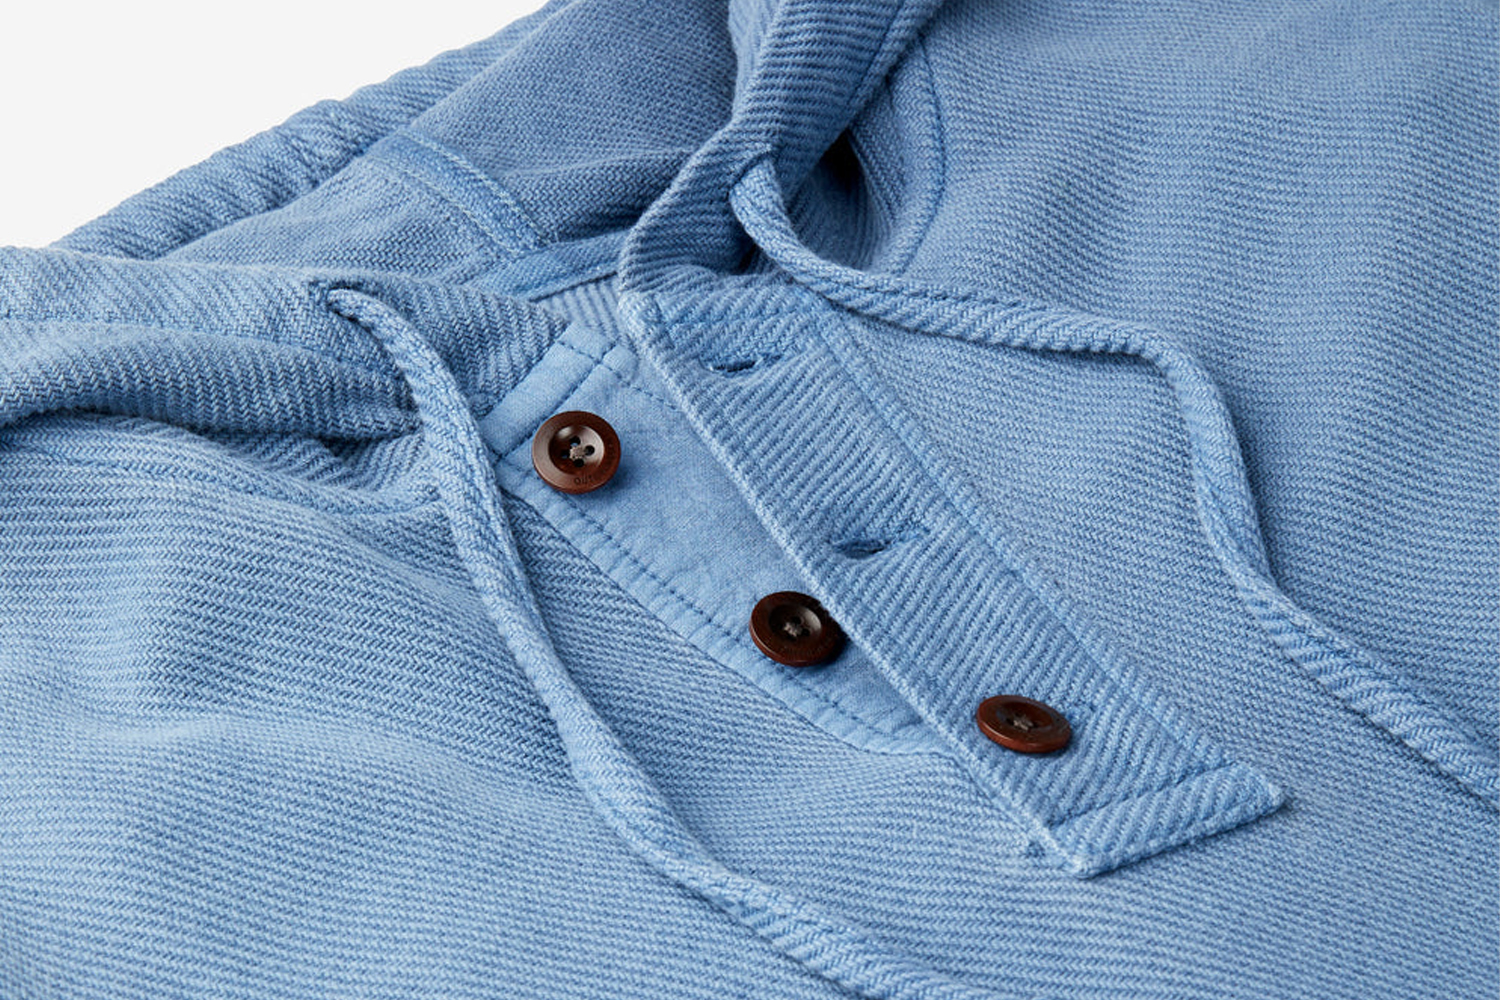 Take a closer look at Outerknown's Blanket Hoodie